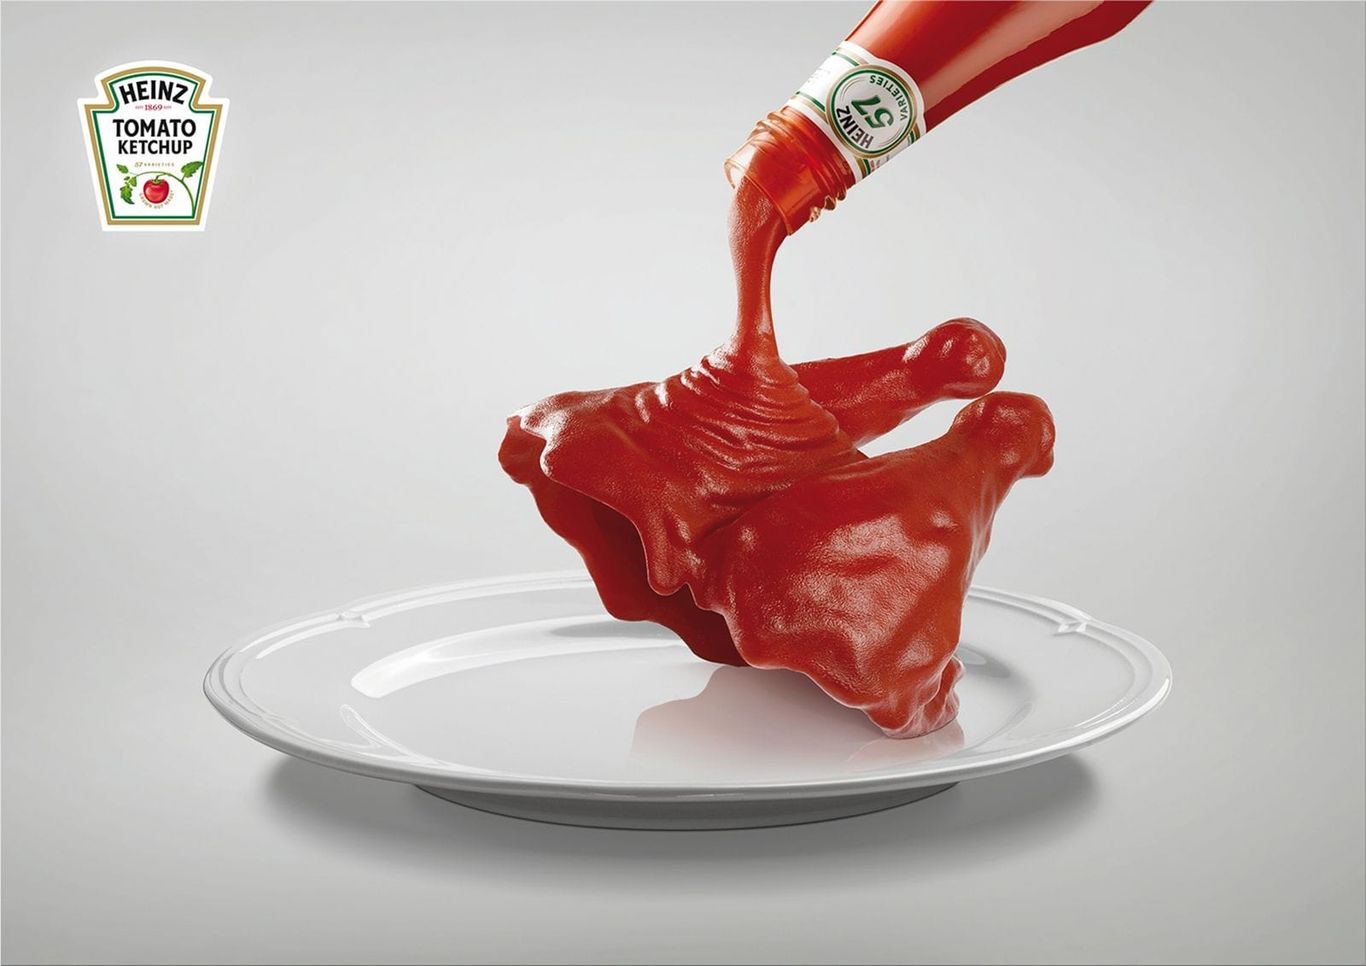 Heinz Ketchup: Grown not made | ad Ruby